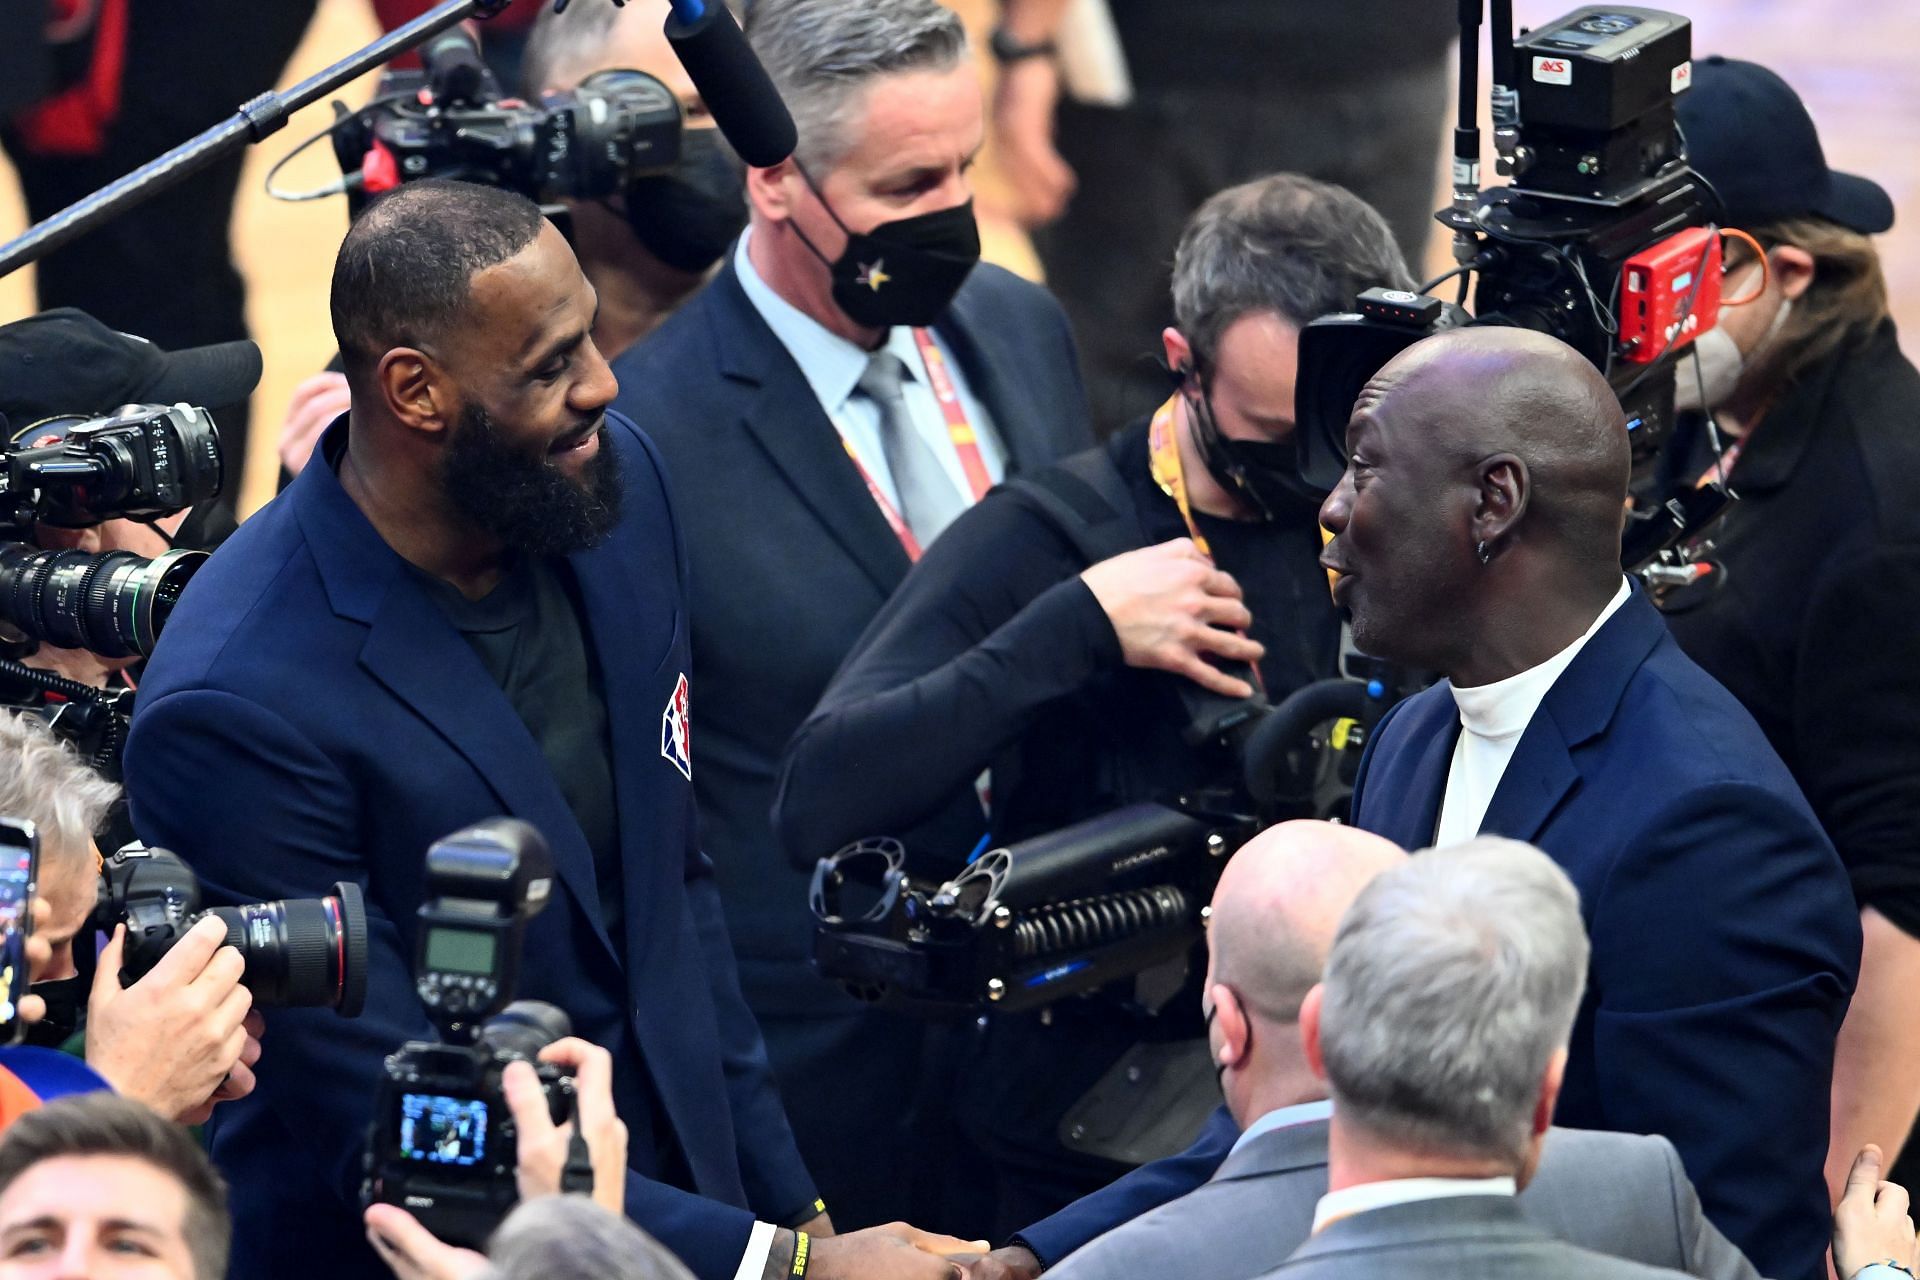 LeBron James and Michael Jordan greet each other during the 2022 NBA All-Star Game.